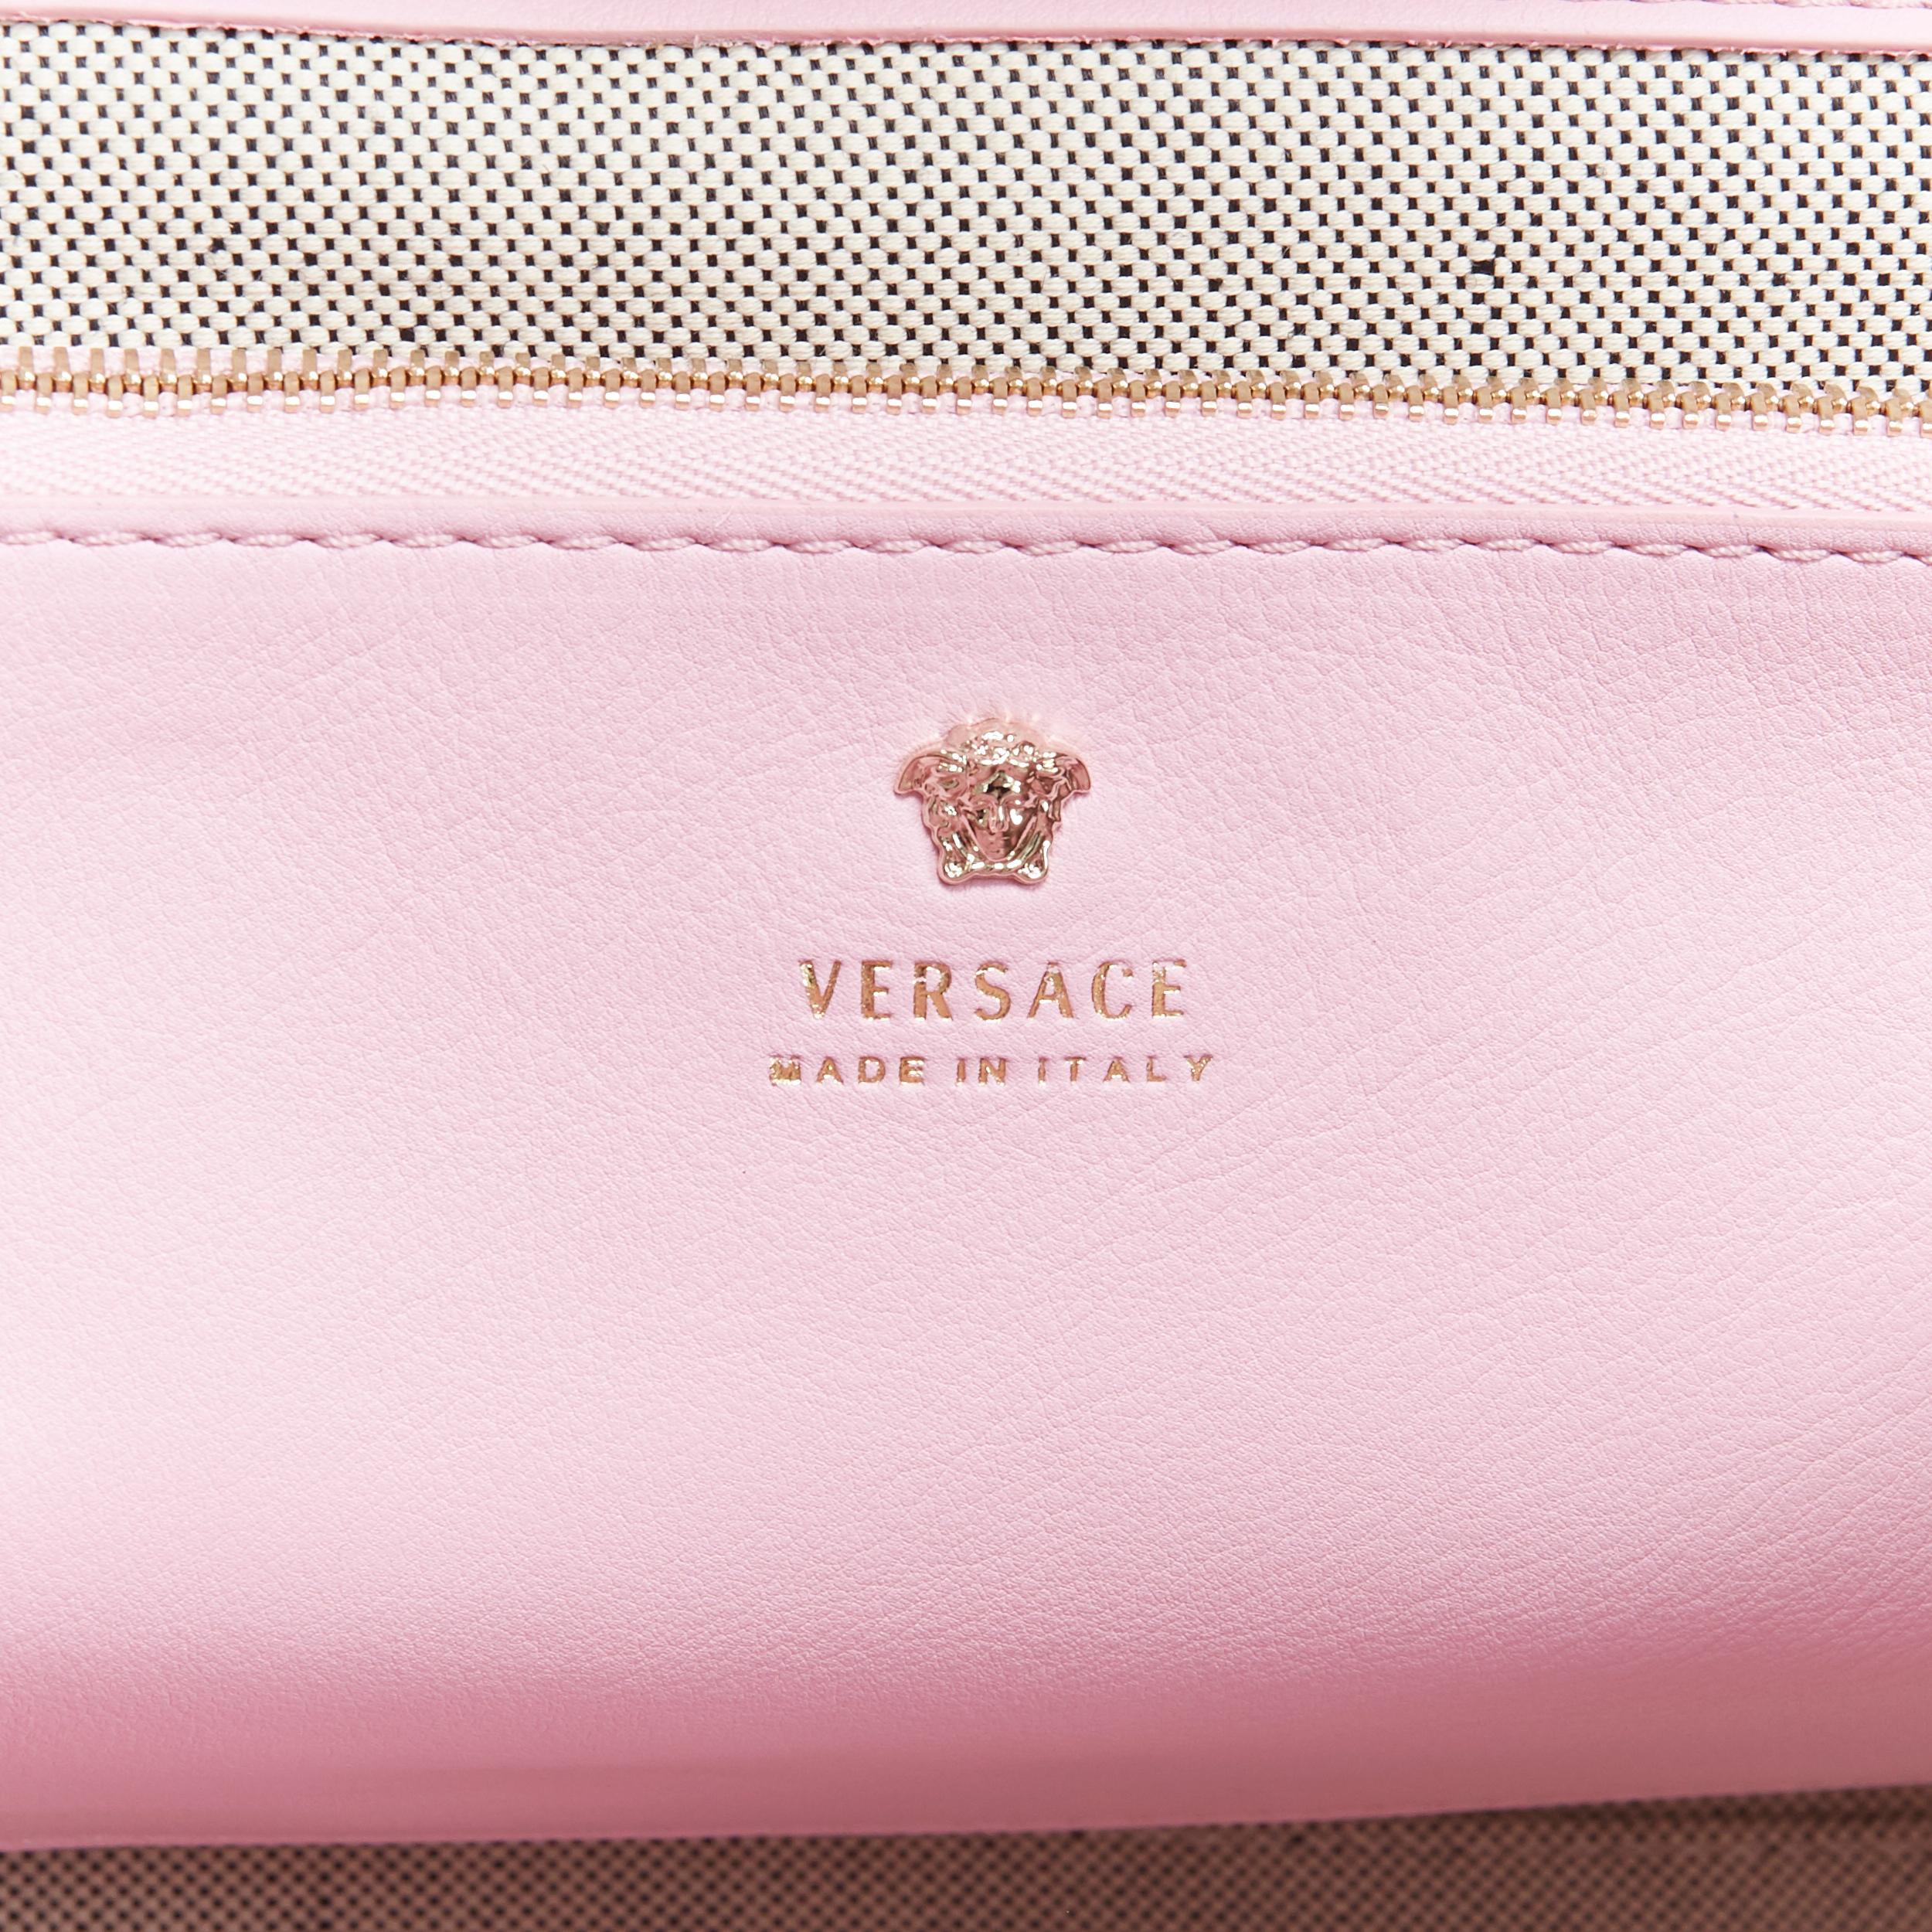 new VERSACE Palazzo Empire pink leather embroidery Medusa flap shoulder bag 4